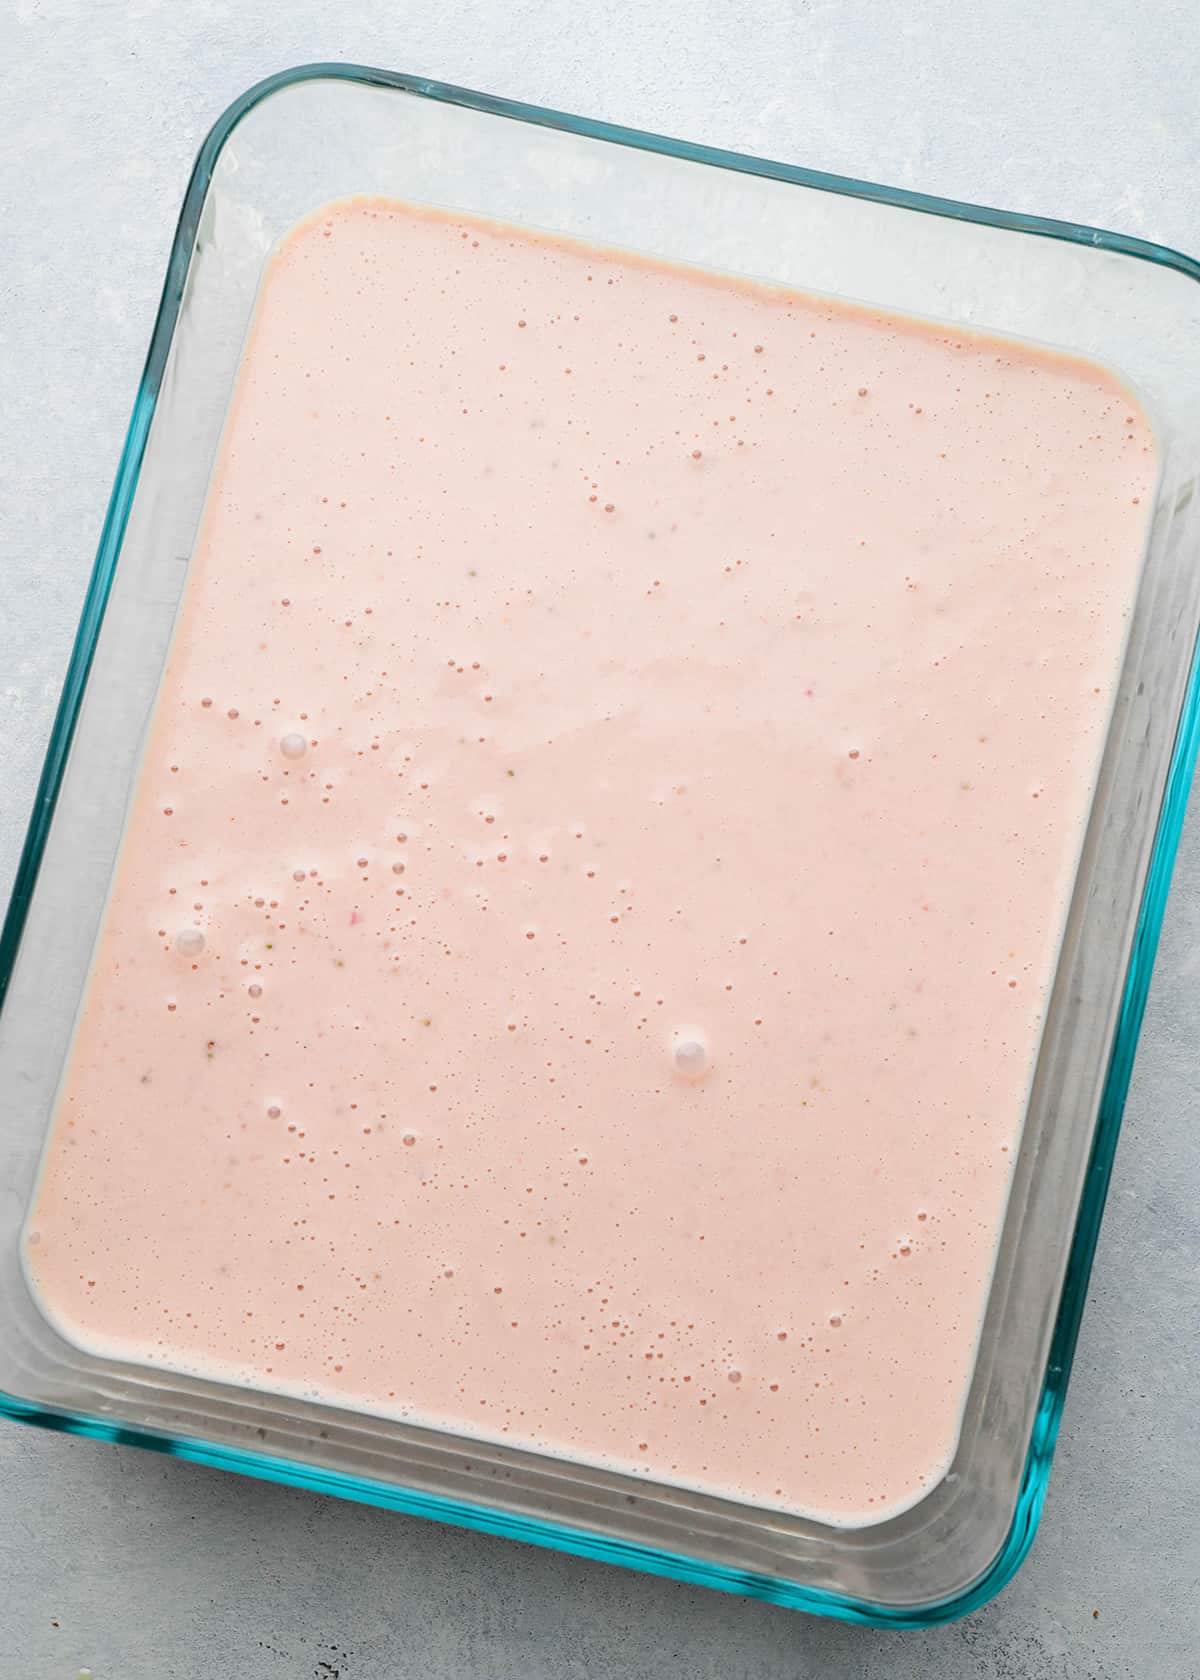 strawberry ice cream mixture in a glass container 